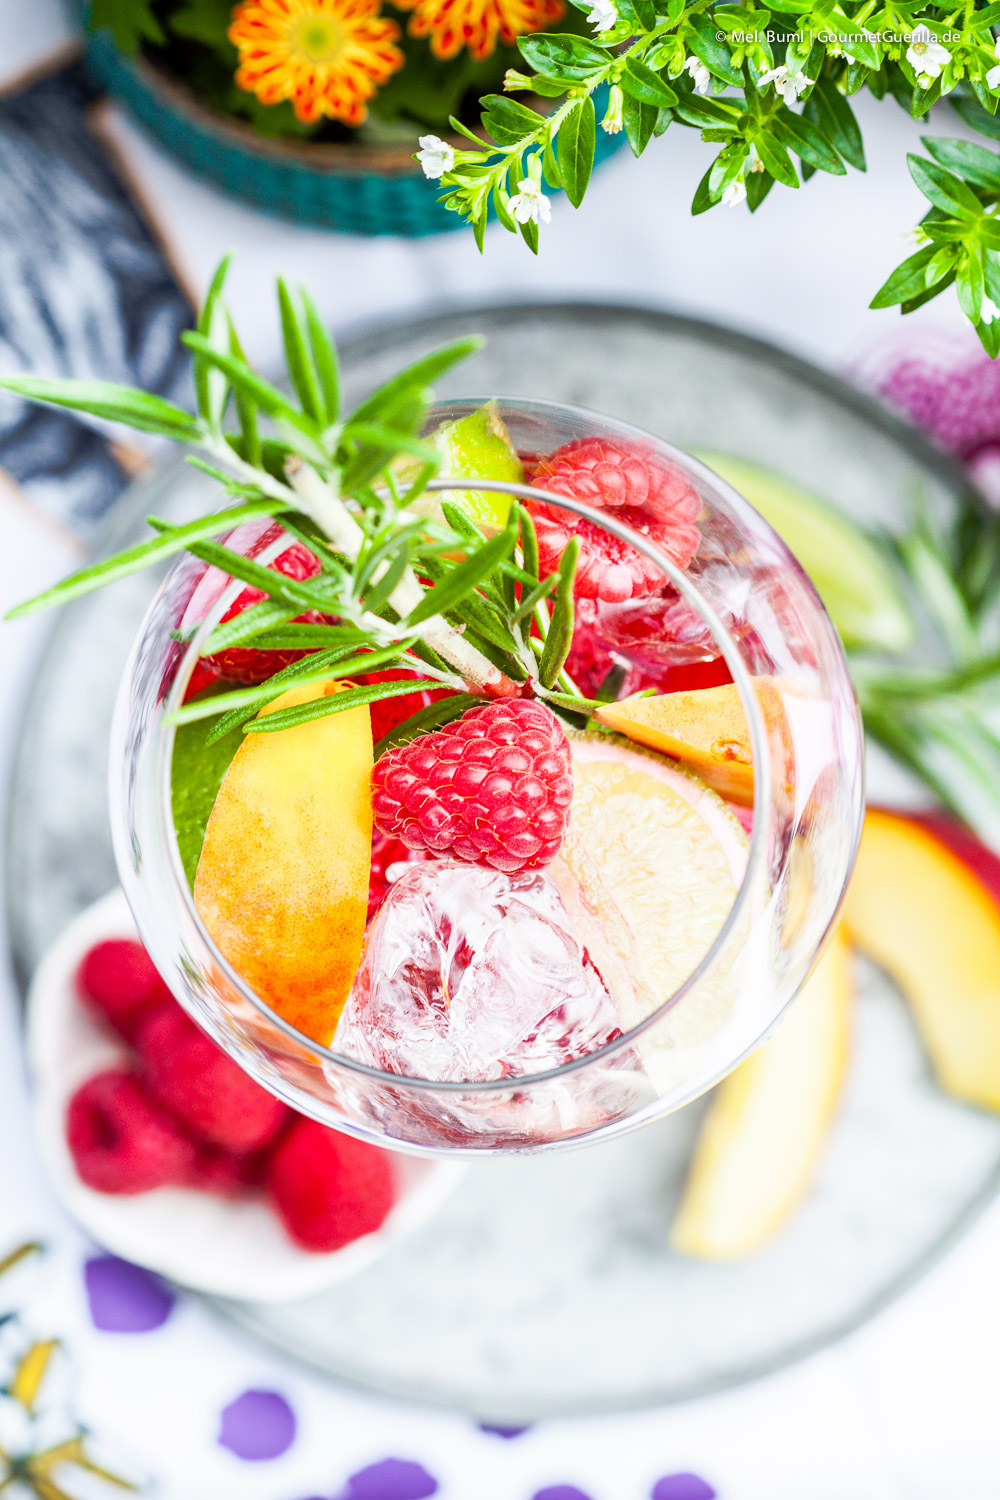 Hibiscus infused Raspberry Secco Punch with Peach and Rosemary | GourmetGuerilla.com